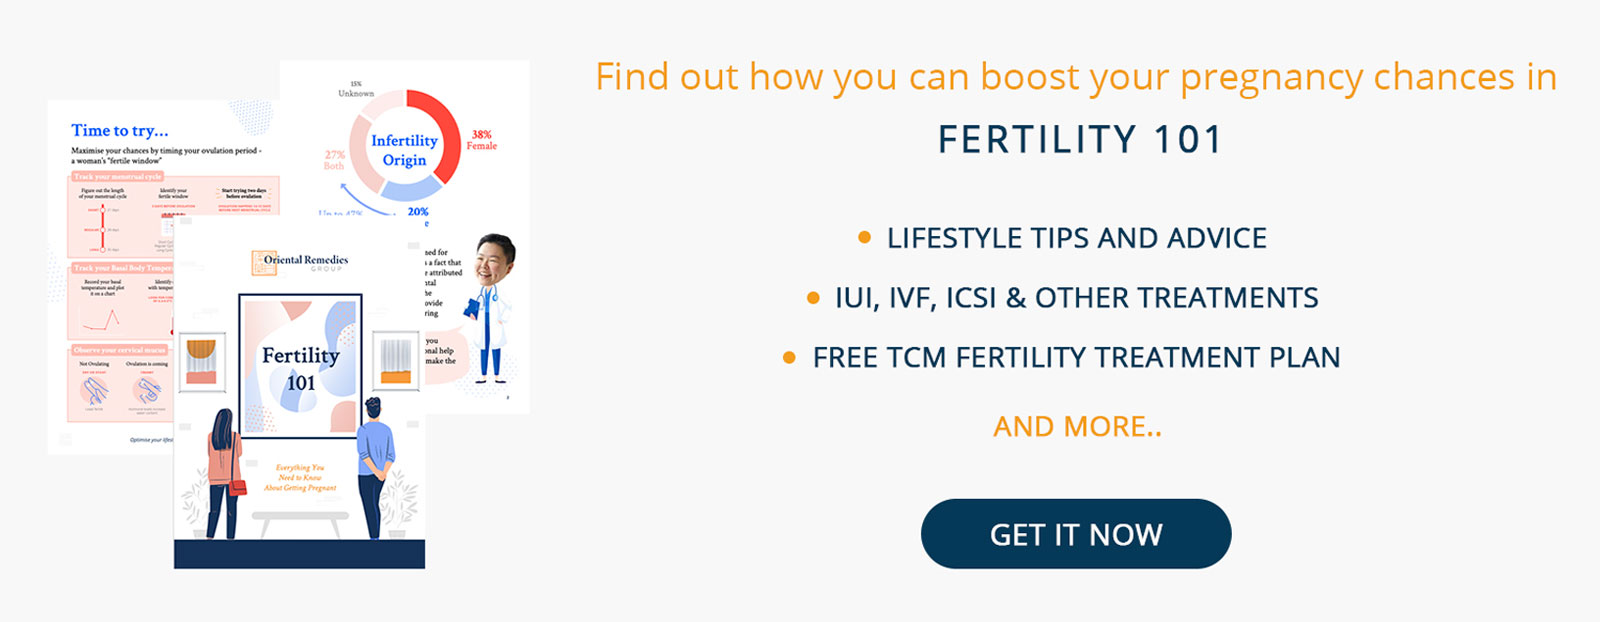 Tips, advice and treatment to boost fertility